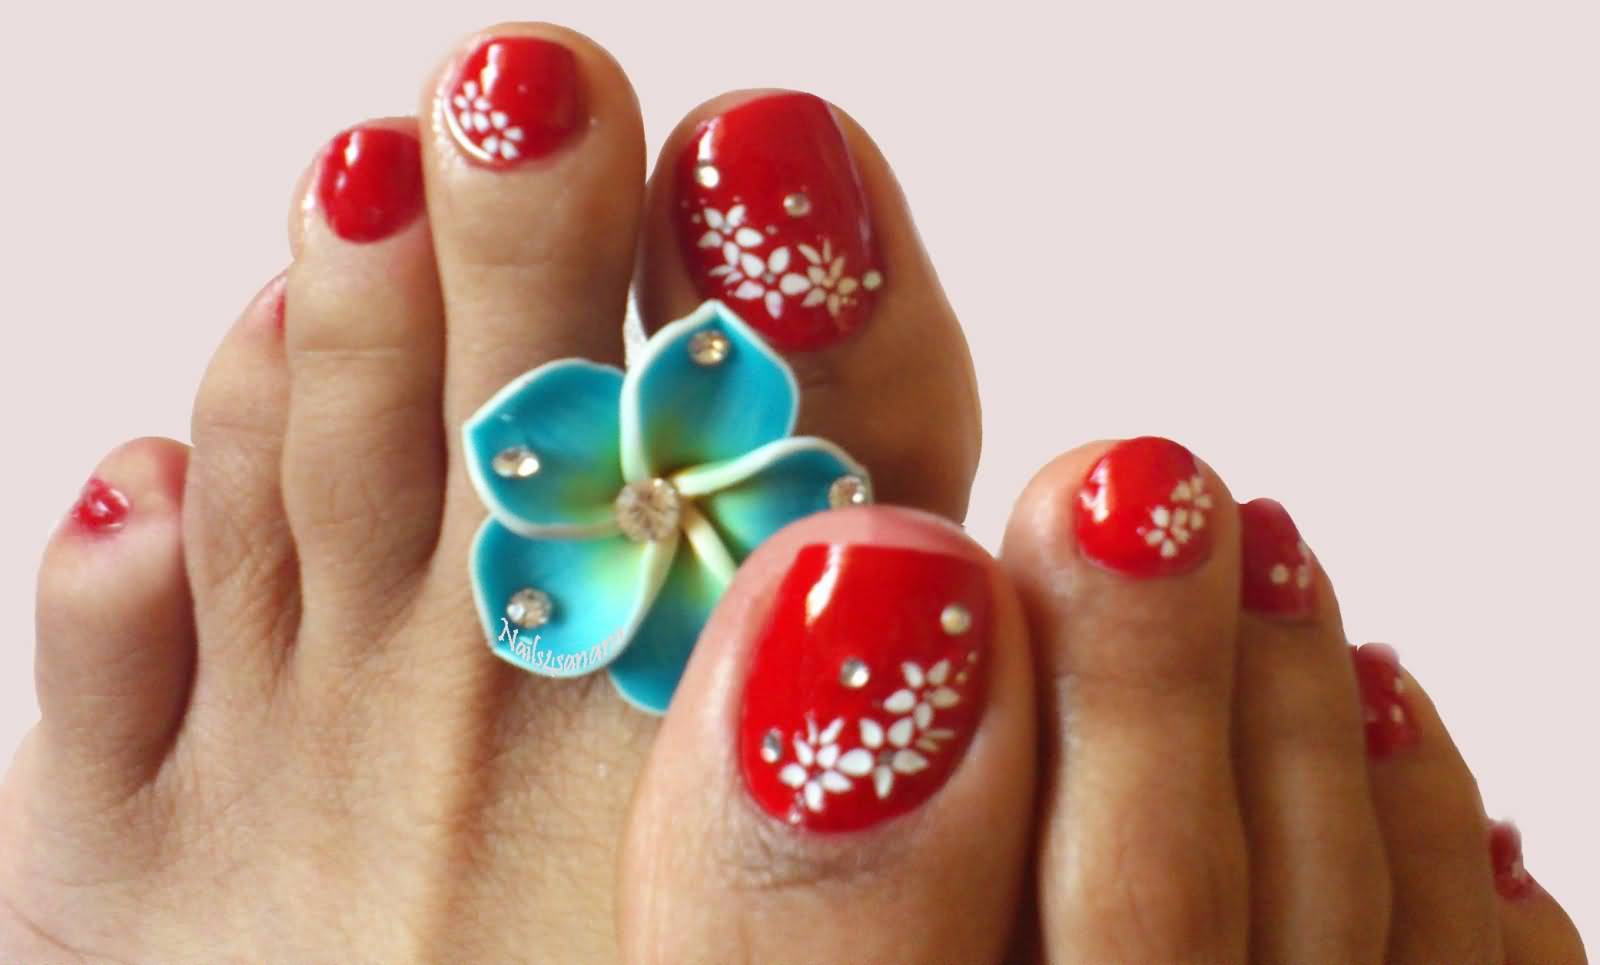 Red Toe Nails With White Flowers Design